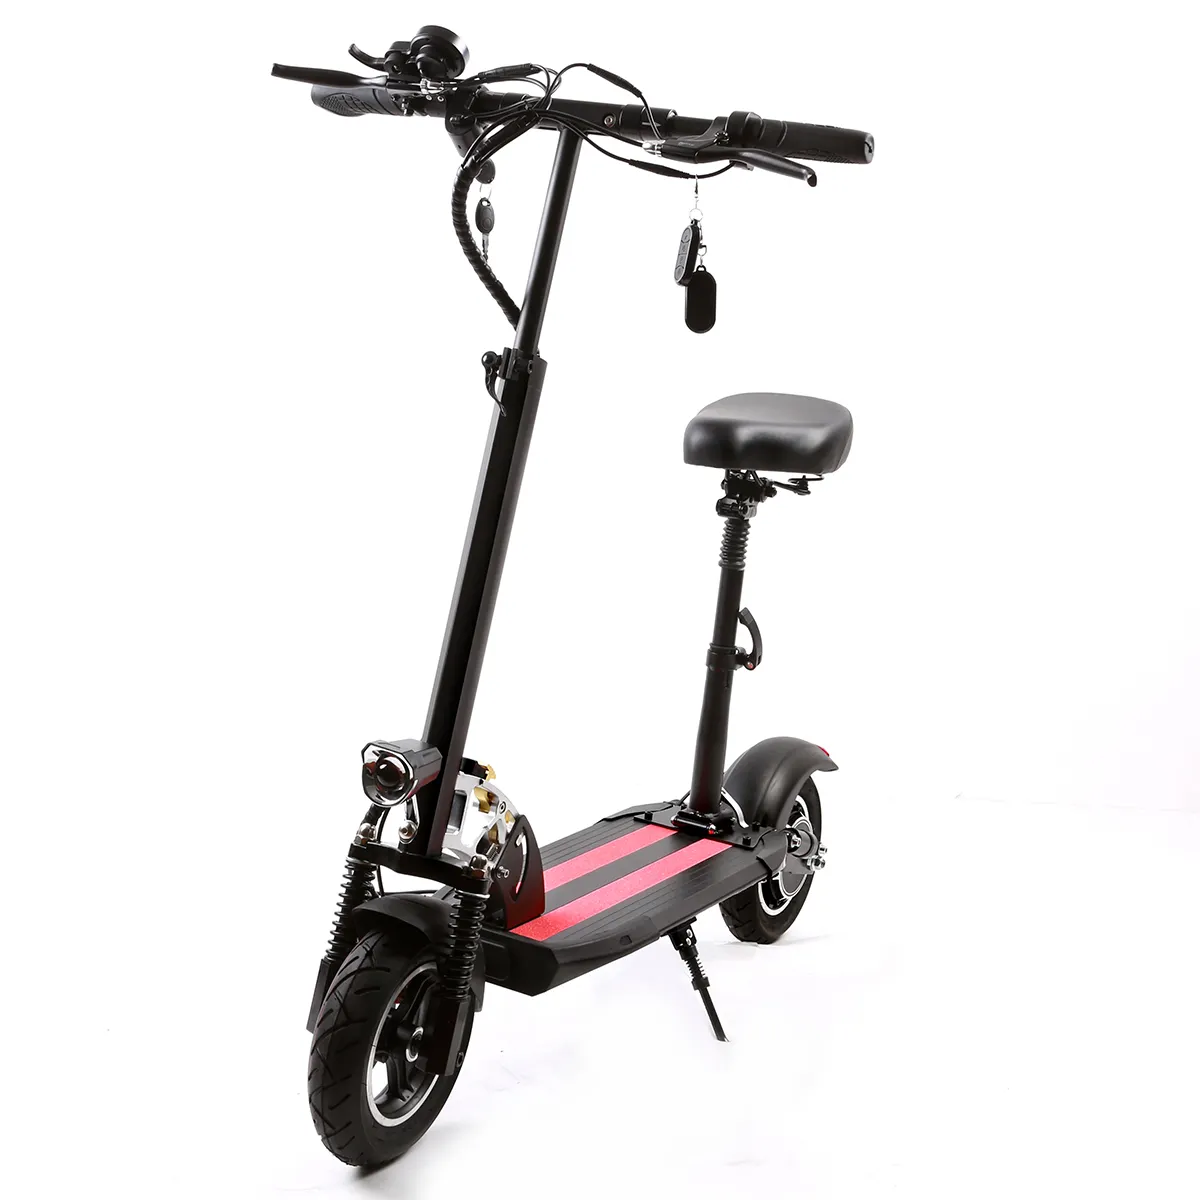 Usa/eu Stock Fast Shipping To Usa Electric Scooter 500w 800w Bike Electric Bicycle Powerful Electric Scooter